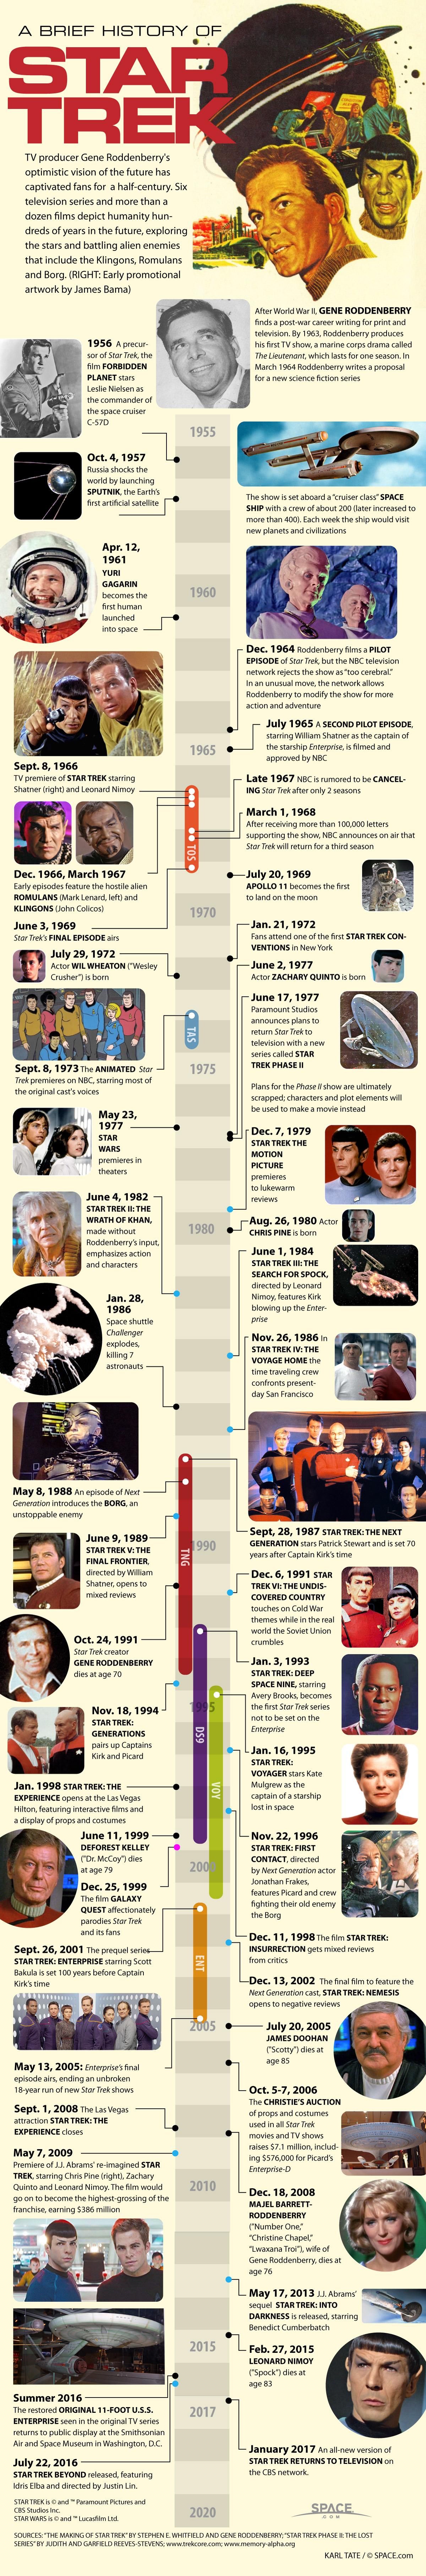 The legacy of Star Trek is more than four decades old and still going strong. See the evolution of Star Trek in this SPACE.com infographic.